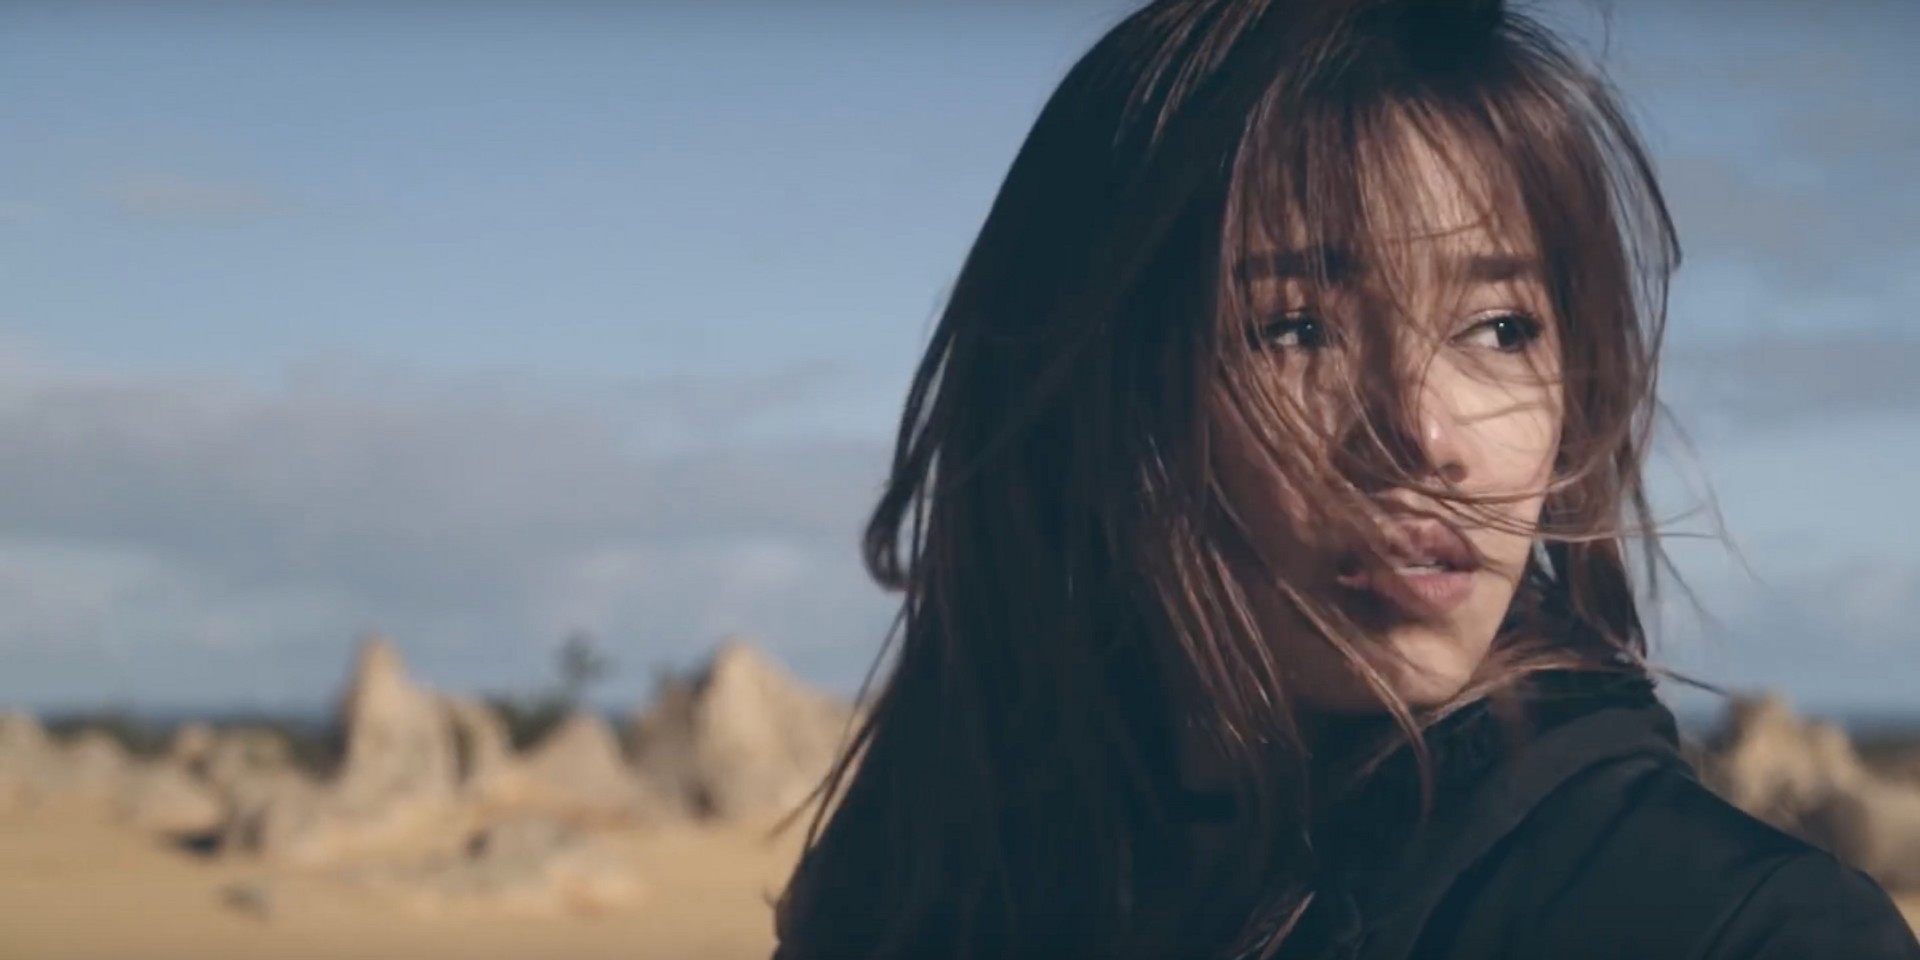 WATCH: Gayle Nerva flirts with tropical house in 'Echoes'